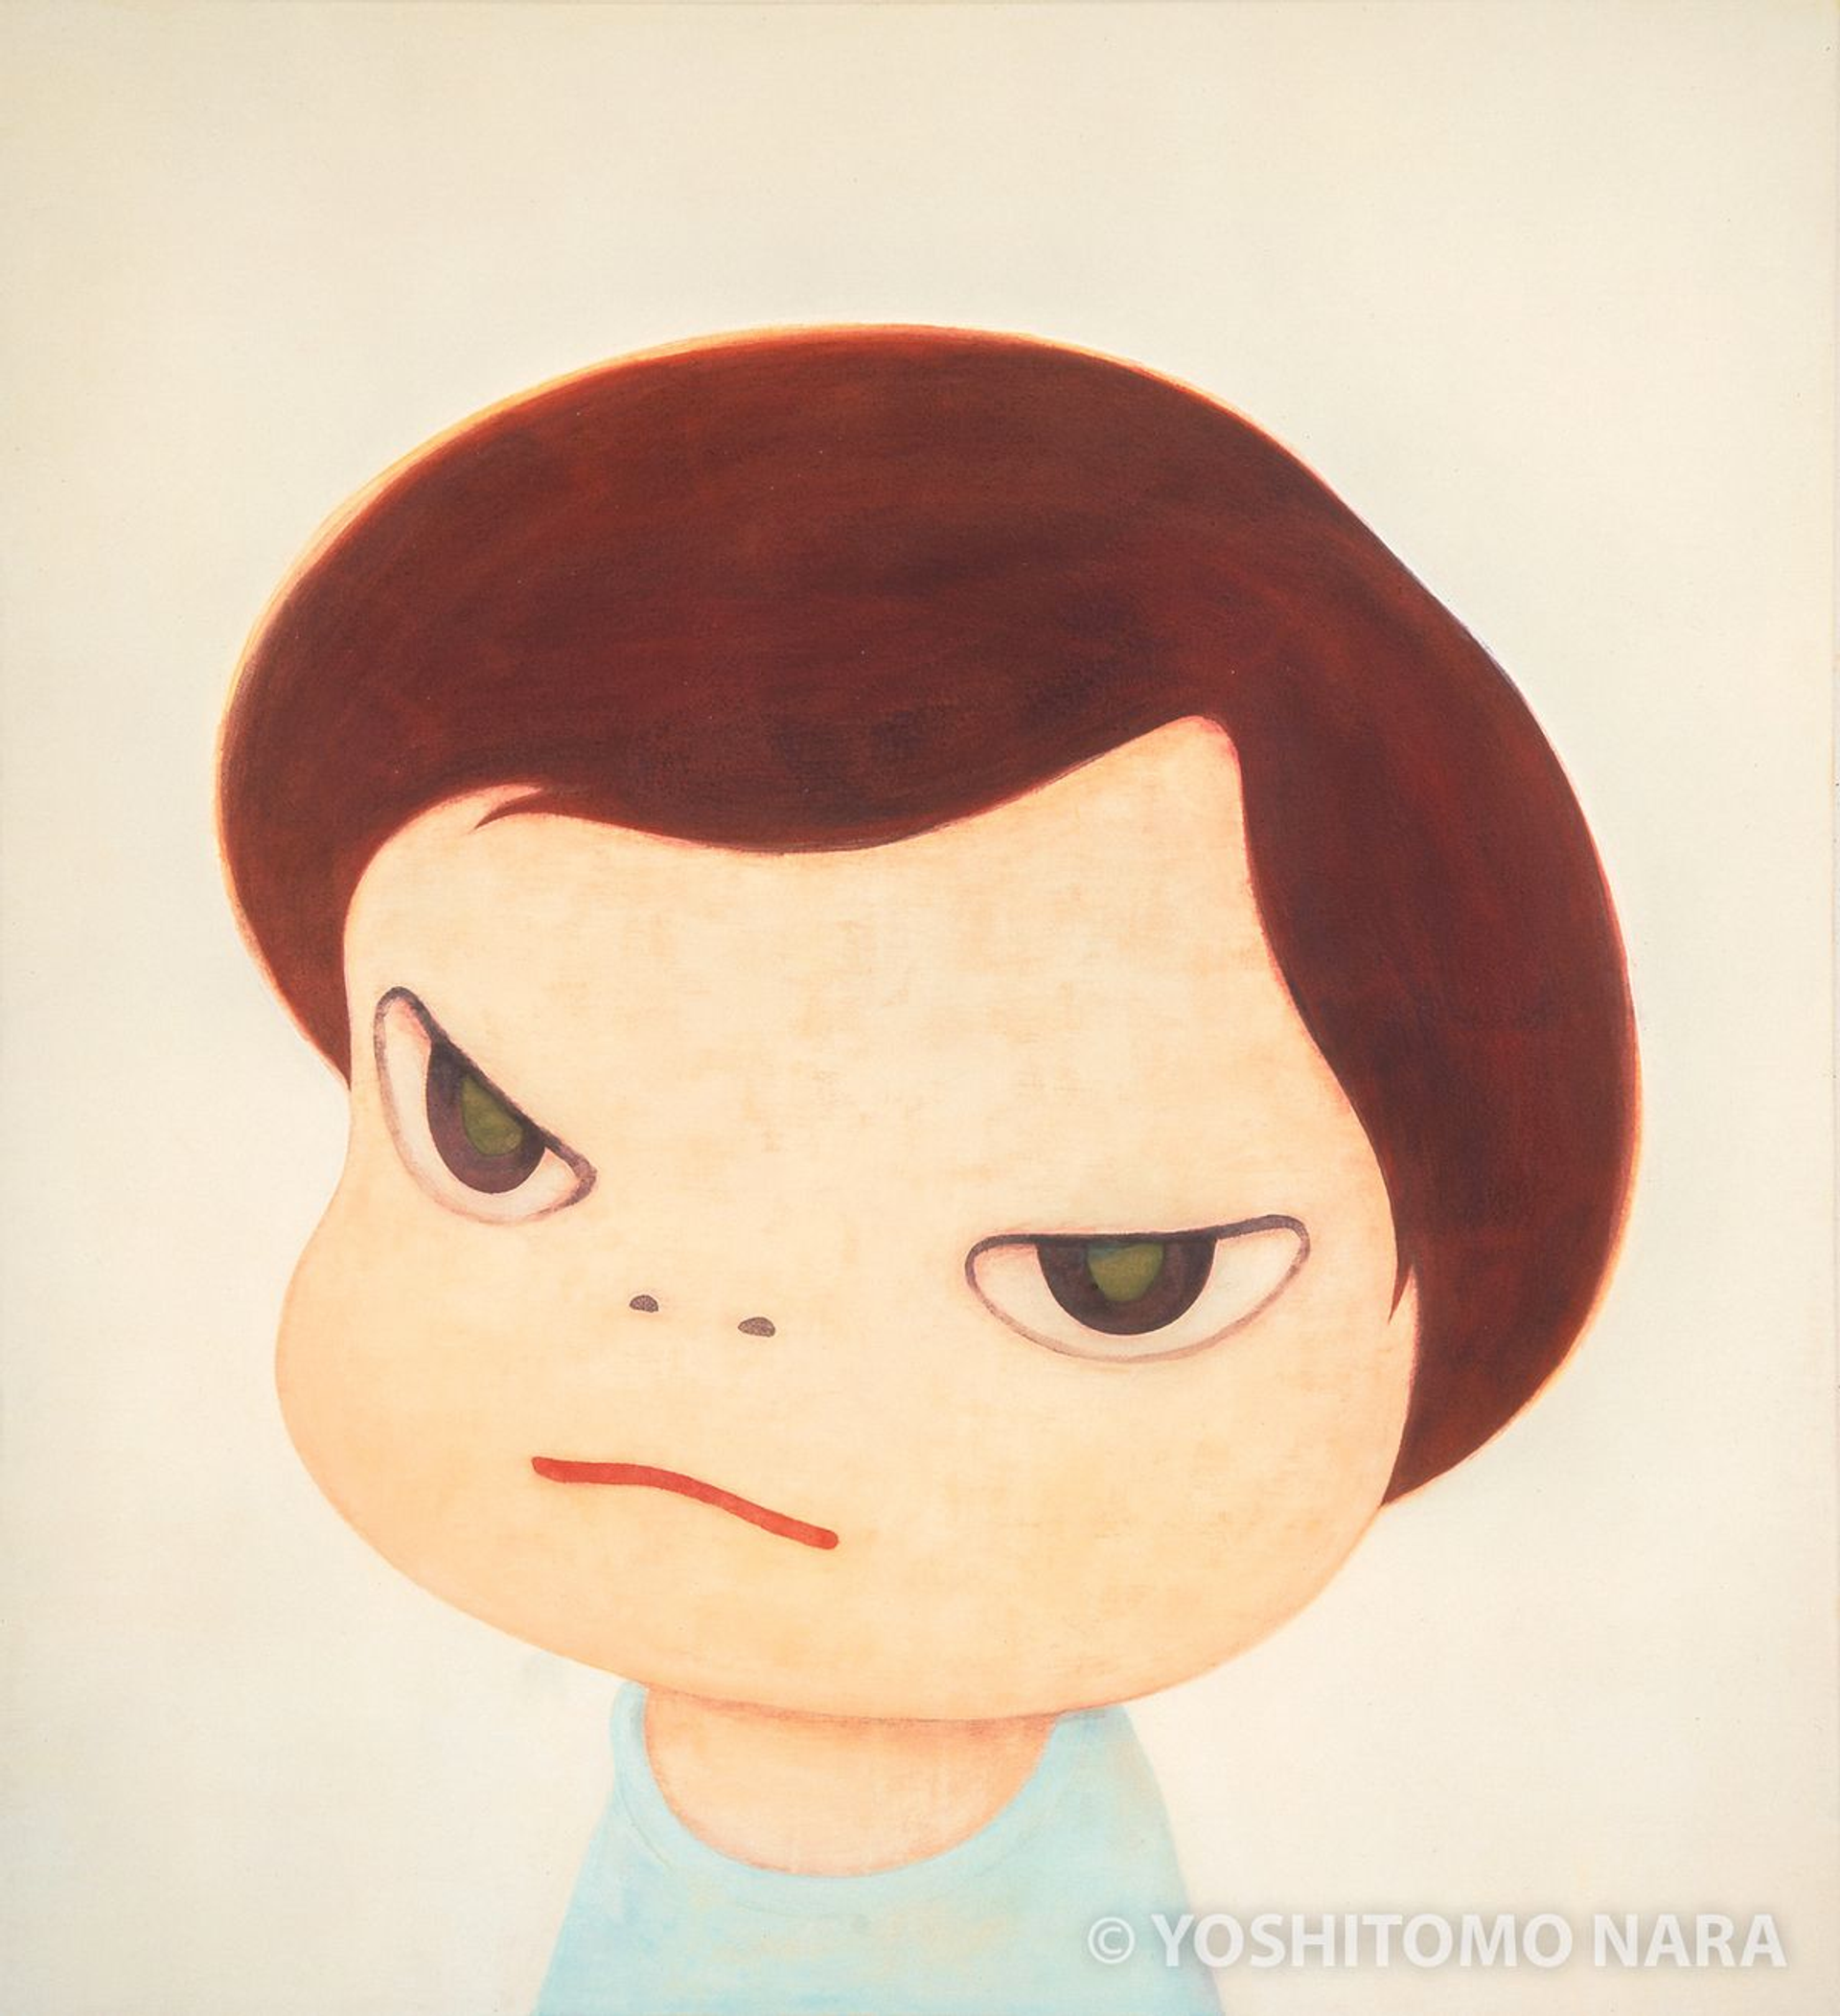 An image of The Boy by Yoshitomo Nara. He is shown with a bowl cut and wearing a blue shirt. His facial expression is serious and angry.